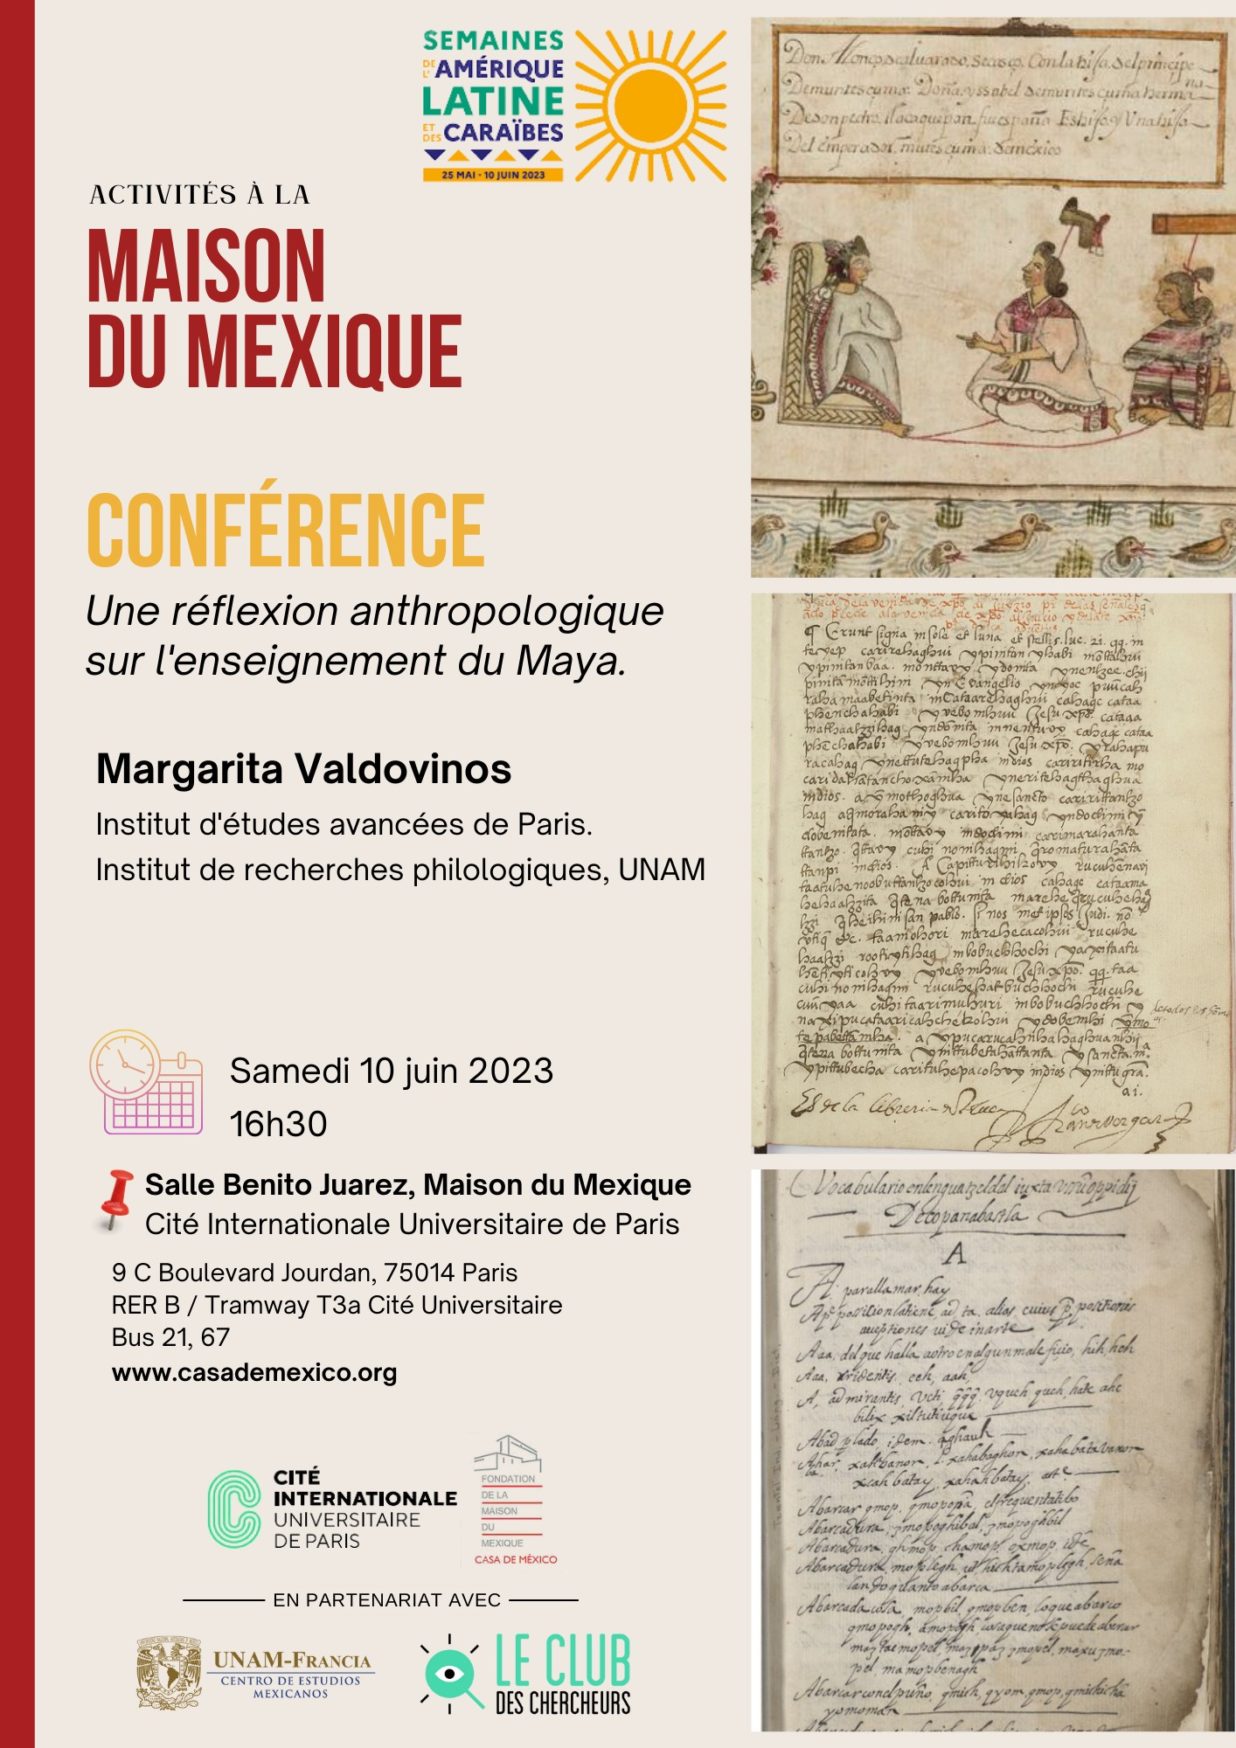 Conference 10 juin